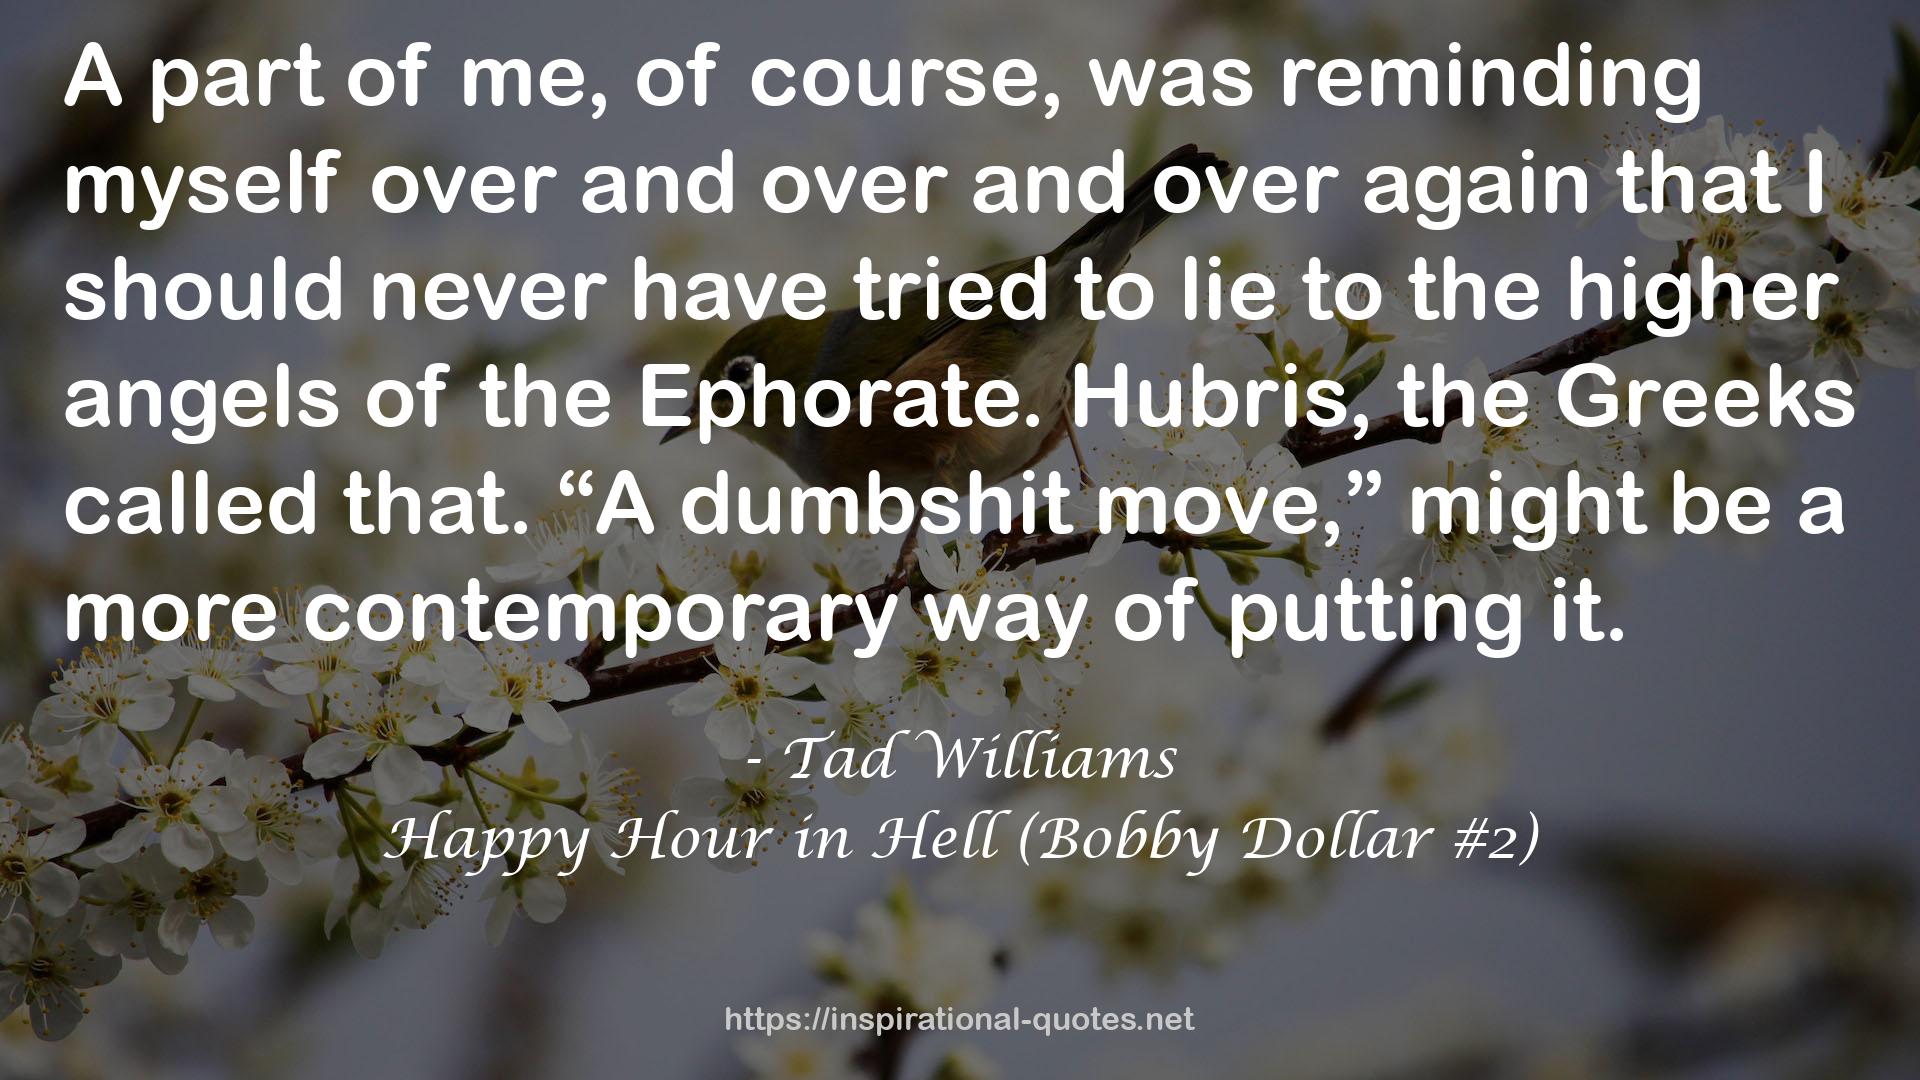 Happy Hour in Hell (Bobby Dollar #2) QUOTES